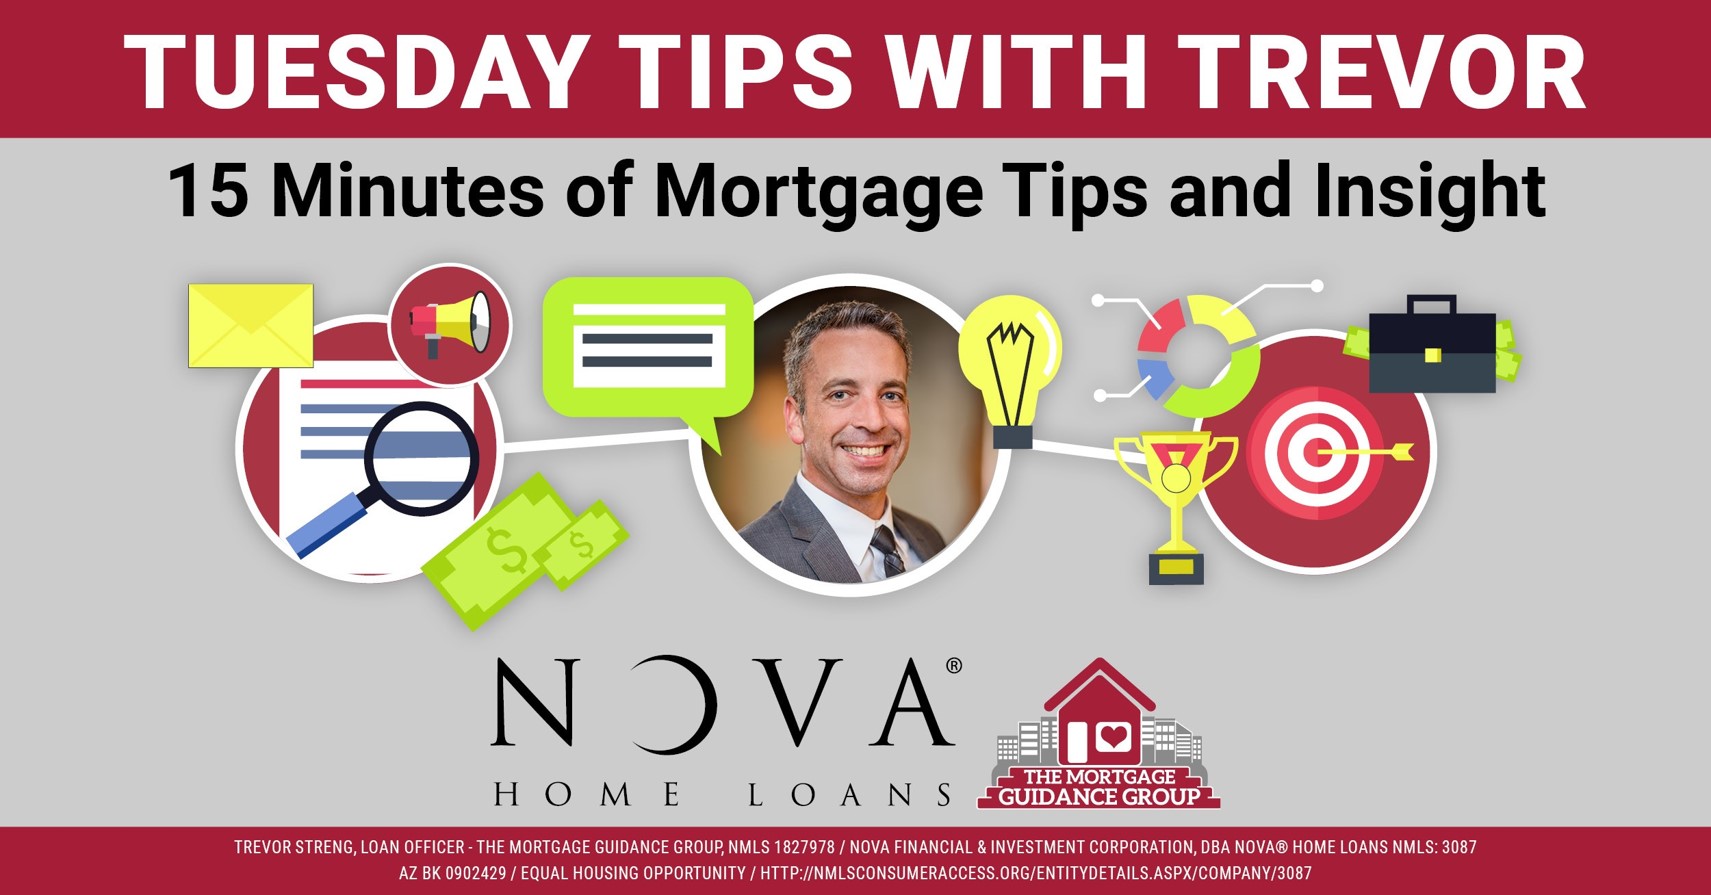 Tuesday Tips with Trevor - 15 Minutes of Mortgage Tips and Insights